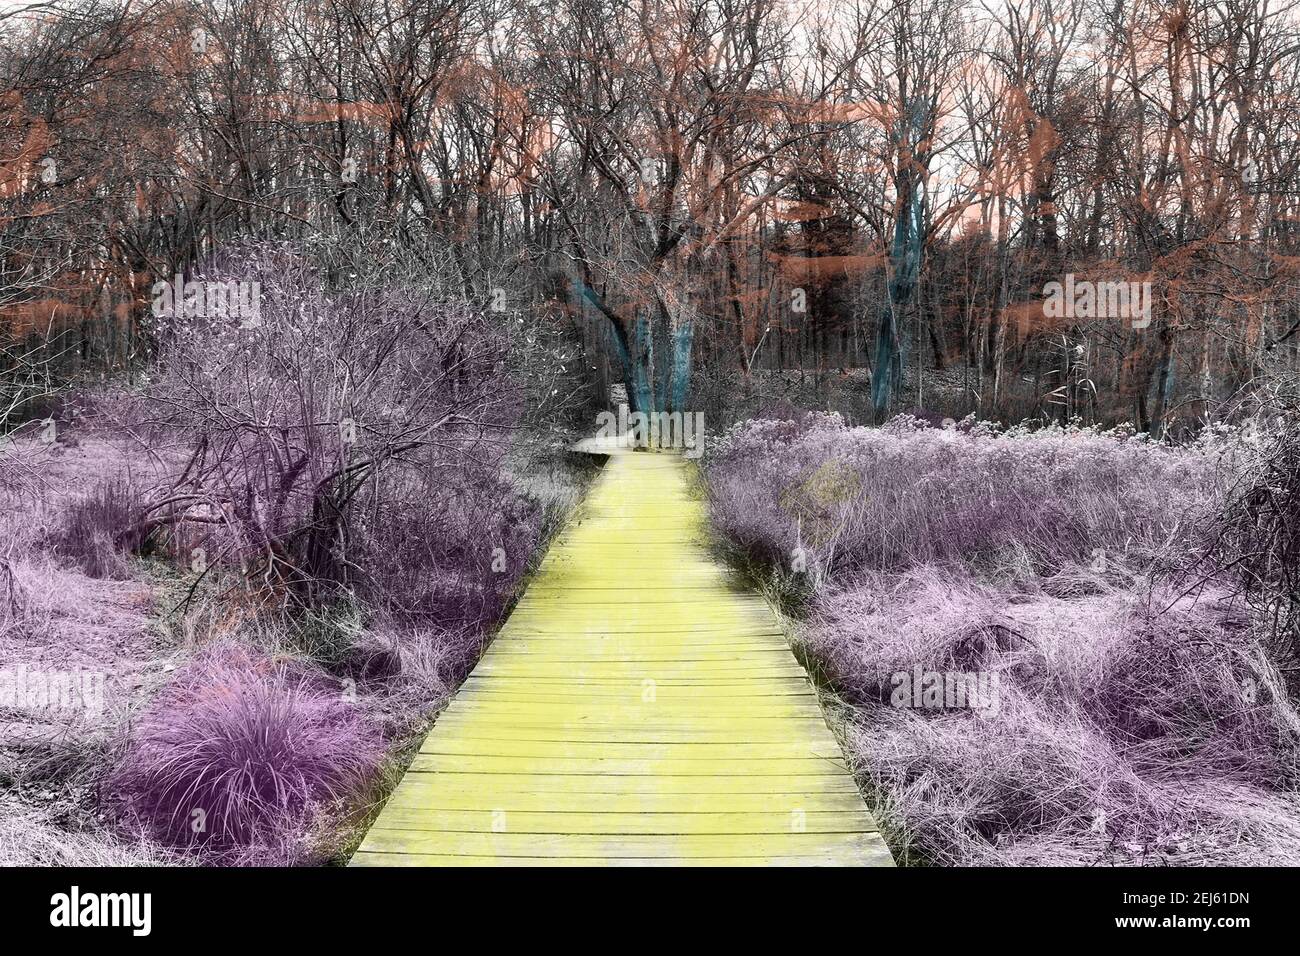 Yellow Brick Road - Mixed media illustration of path in woods with areas painted and tinted Stock Photo